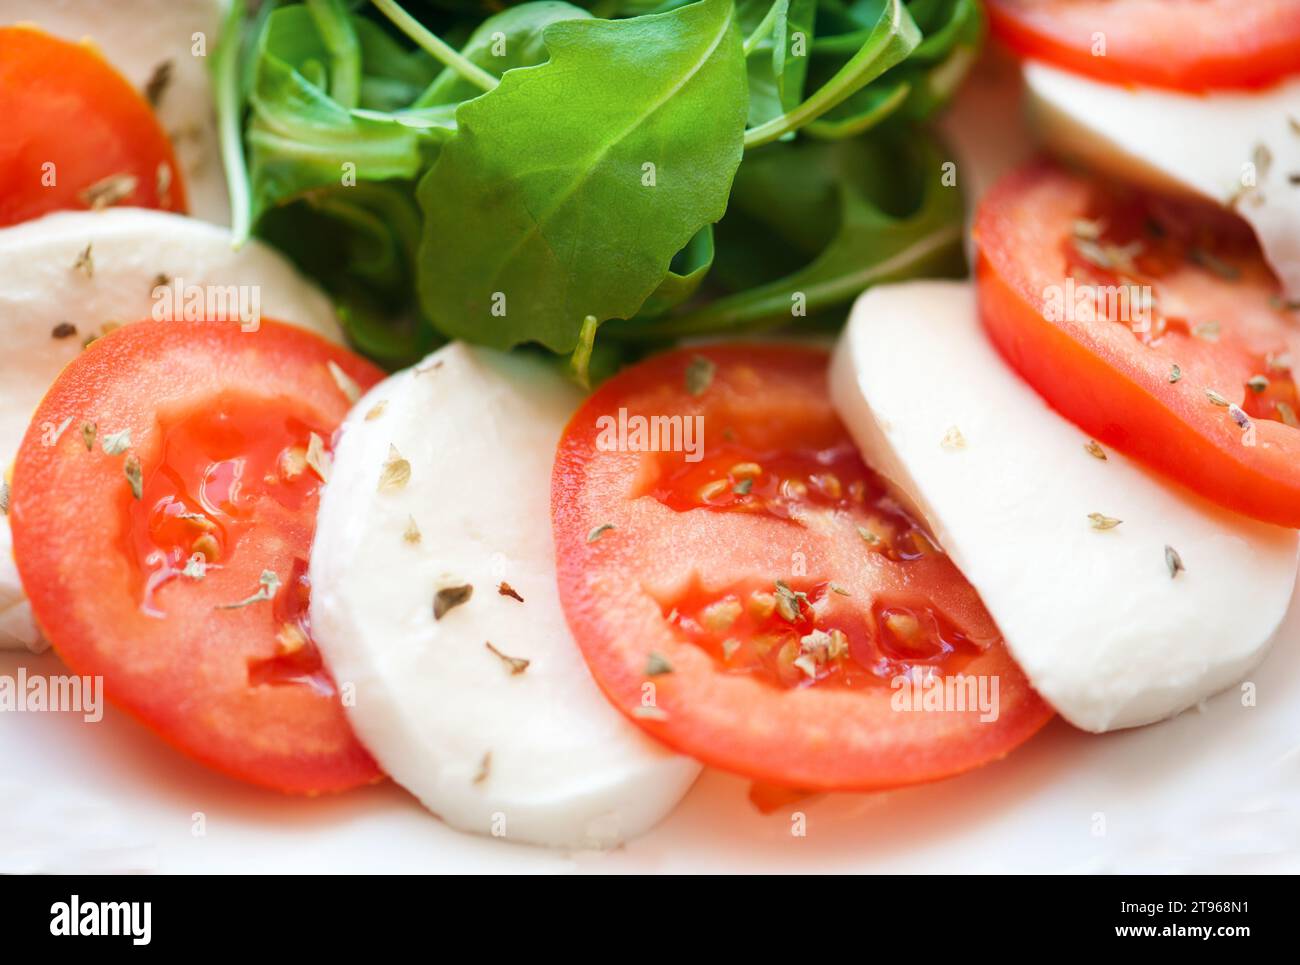 Italian salad with tomatoes and mozzarella filmed in close-up Stock Photo